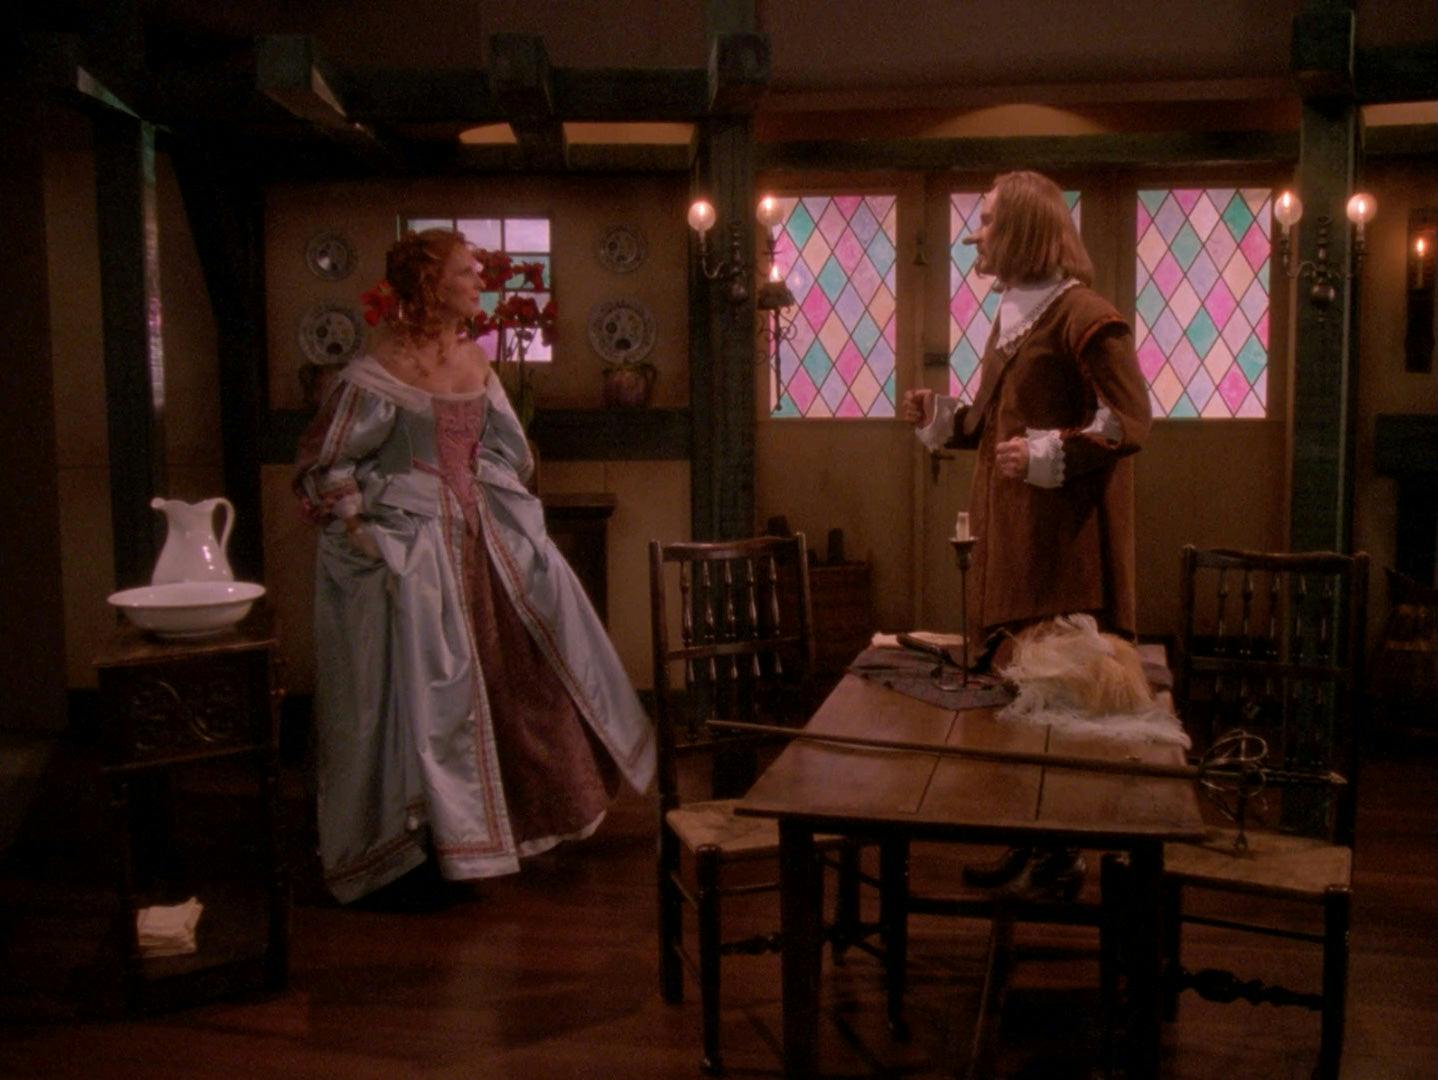 Dr. Crusher and Lt. Barclay perform a scene from Cyrano.